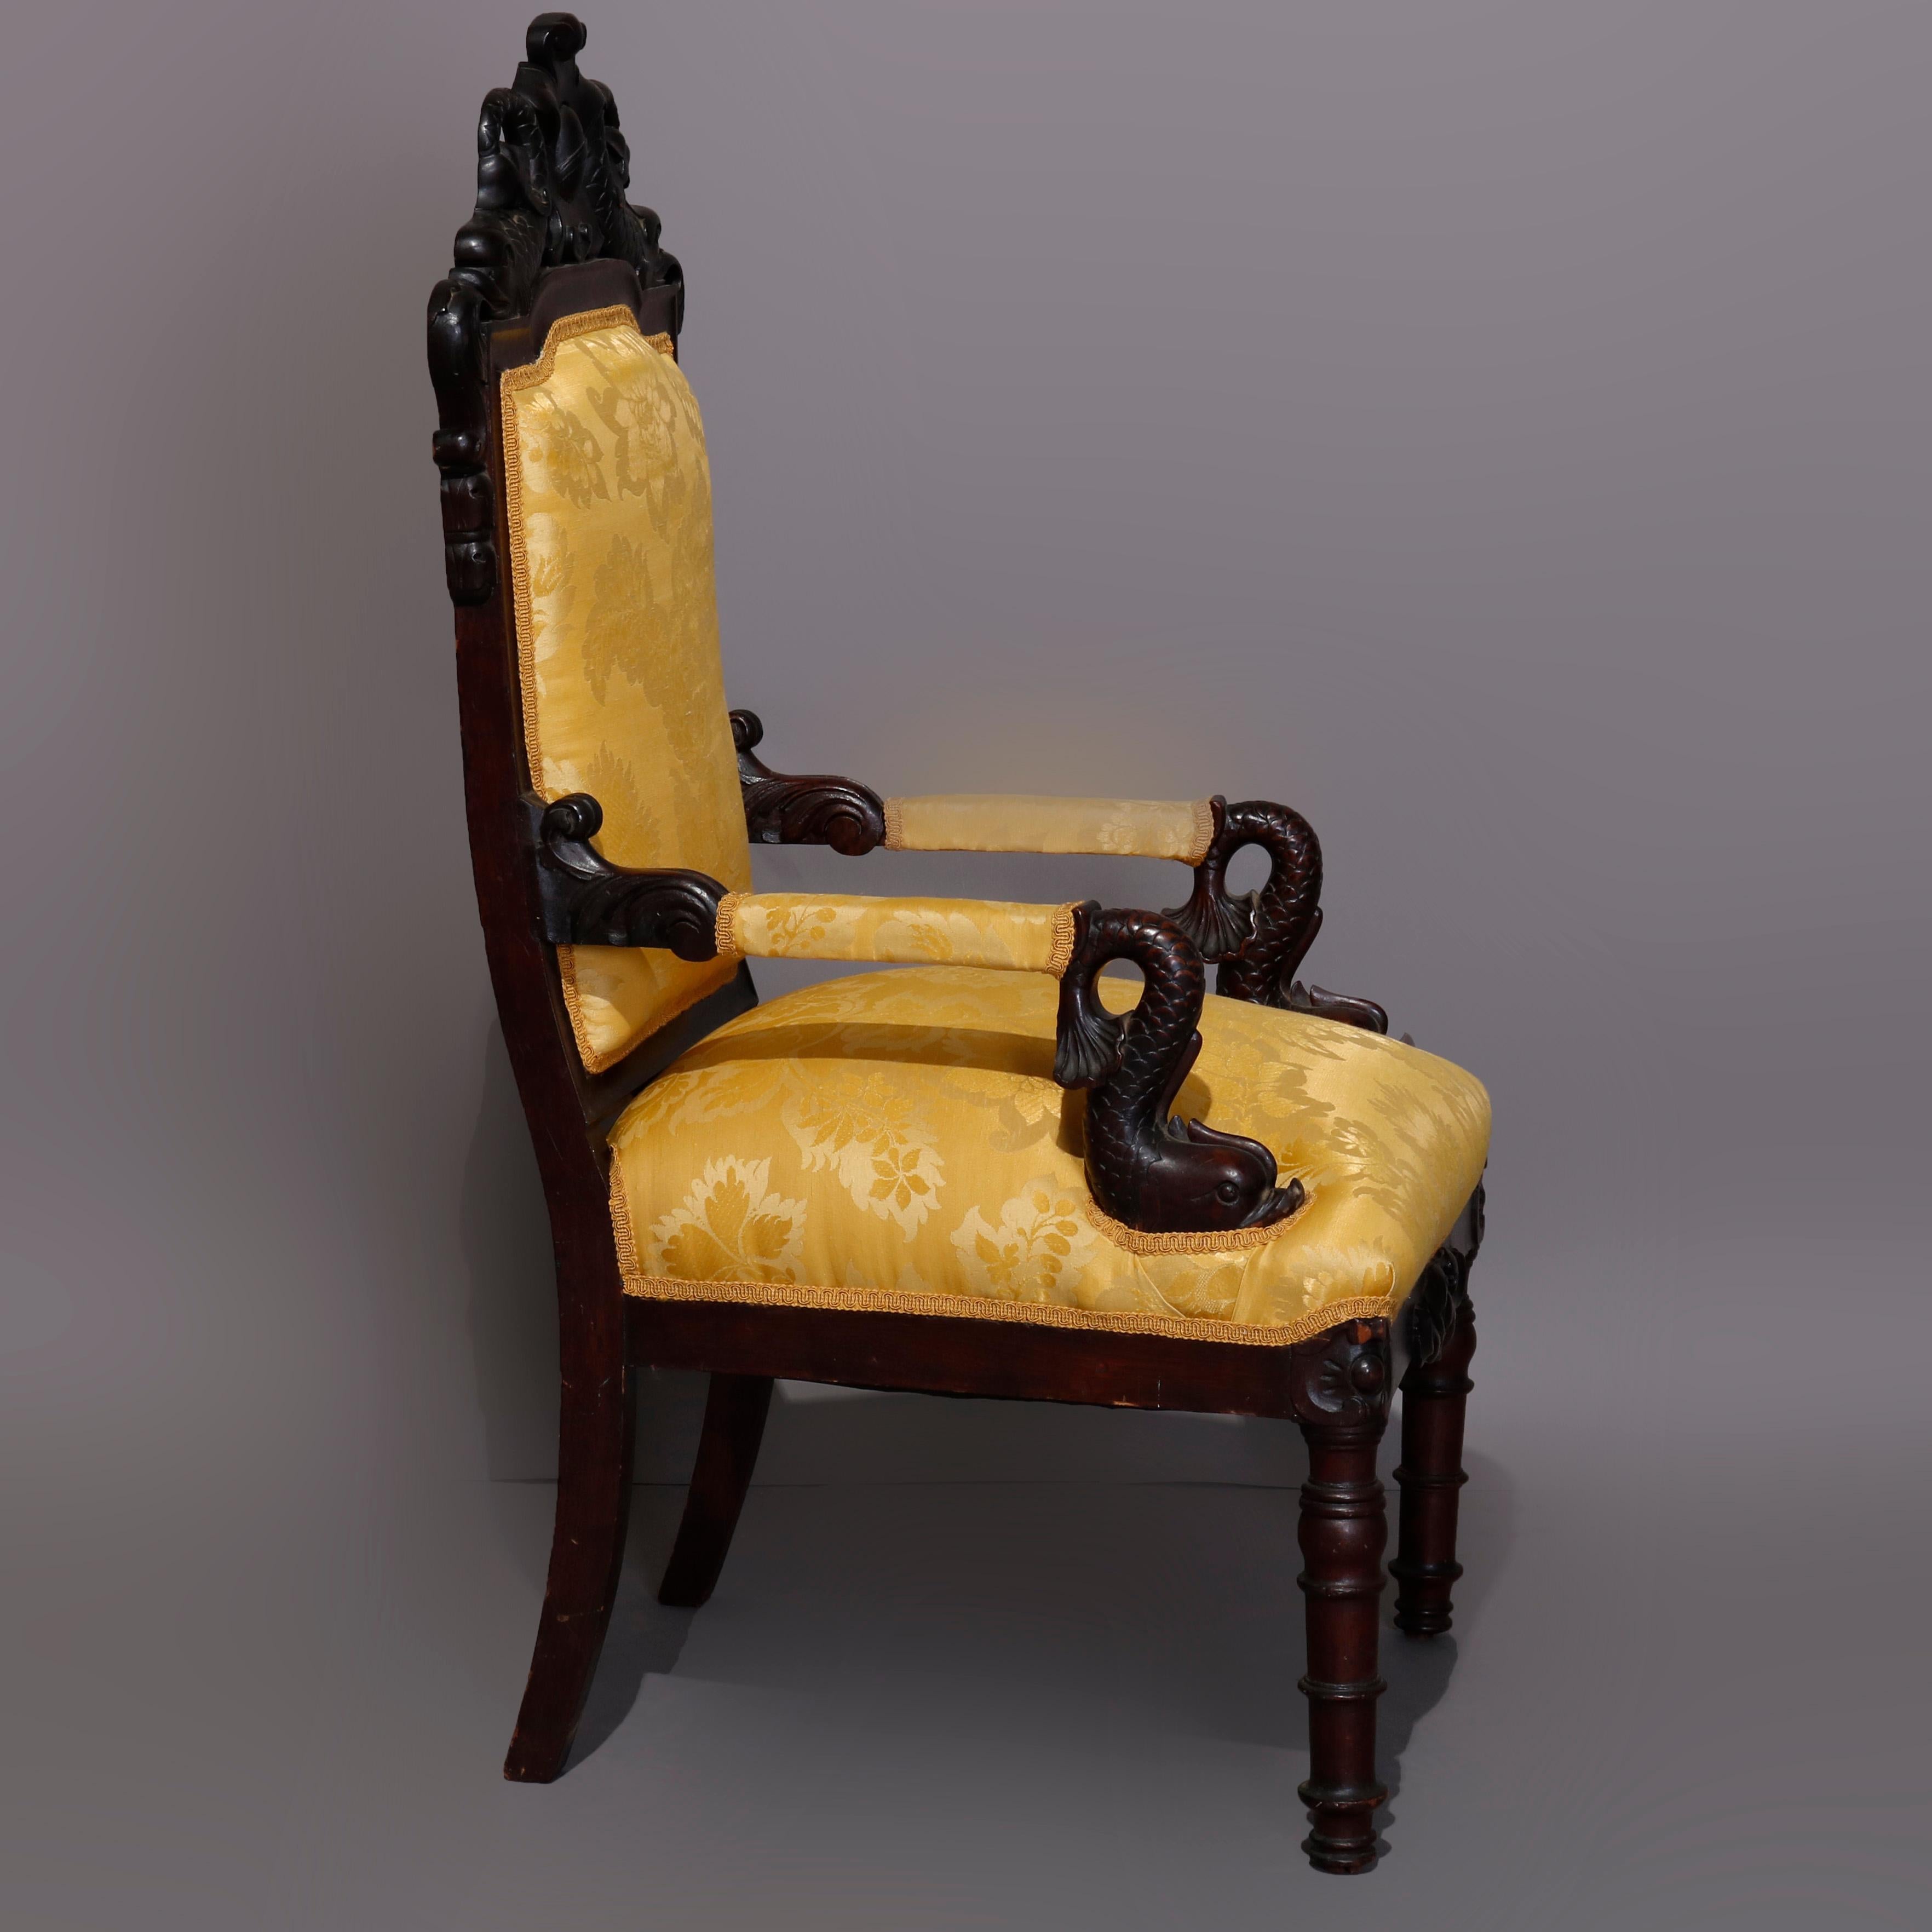 19th Century Figural Baroque Style Carved Rosewood Armchair, Fleur-de-Lis and Dolphins